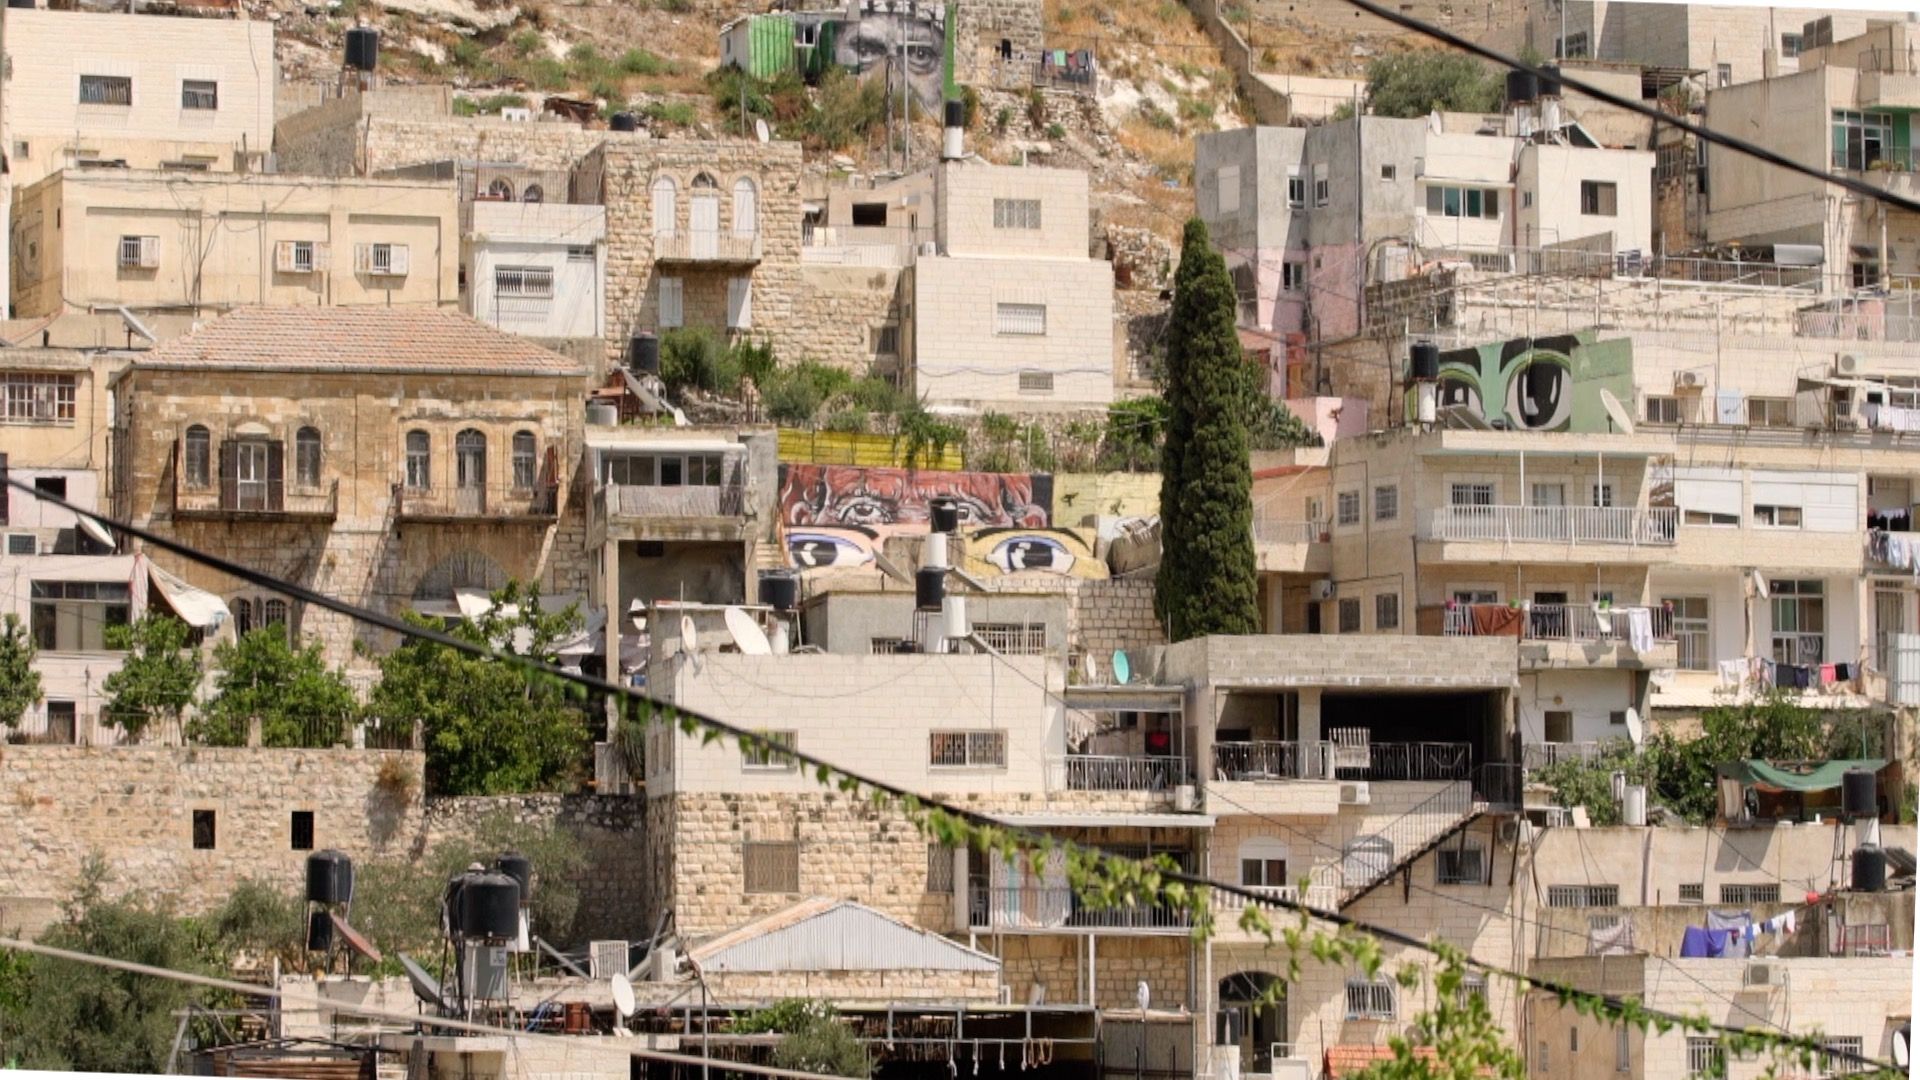 Murals of eyes look out from across the Wadi Hileh area in the Palestinian neighbourhood in Silwan. Image by BBC News Arabic.